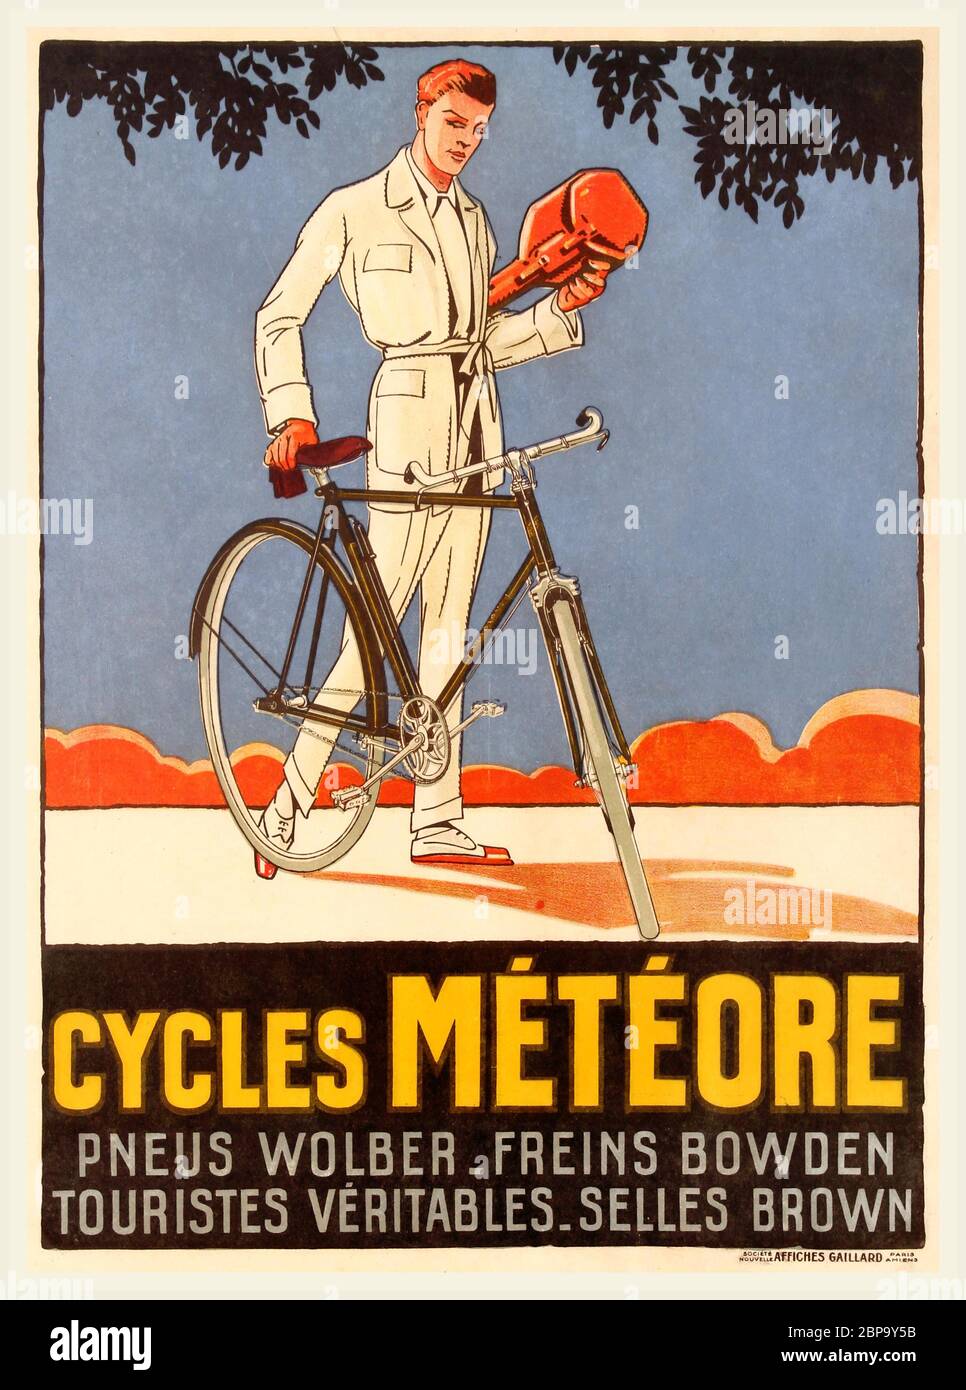 Cycles Meteore 1920's archive historic cycle vintage poster for French bicycles manufacturer Cycles Meteore. Art Deco design showing a young gentleman in a white sports suit holding a tennis racket in a leather case. France. 1920s. Stock Photo